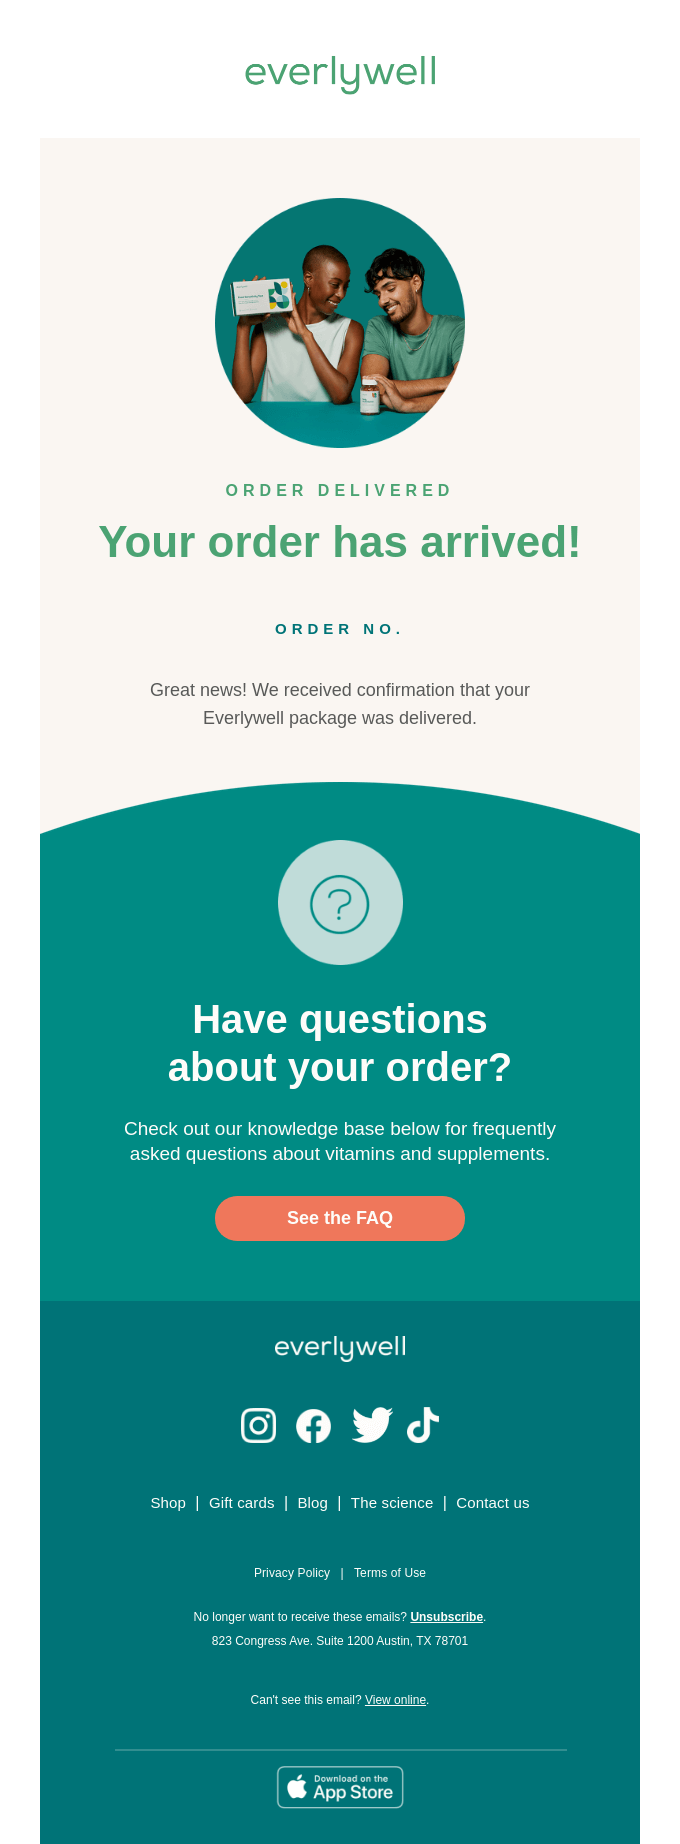 Shipping update email with design and branding